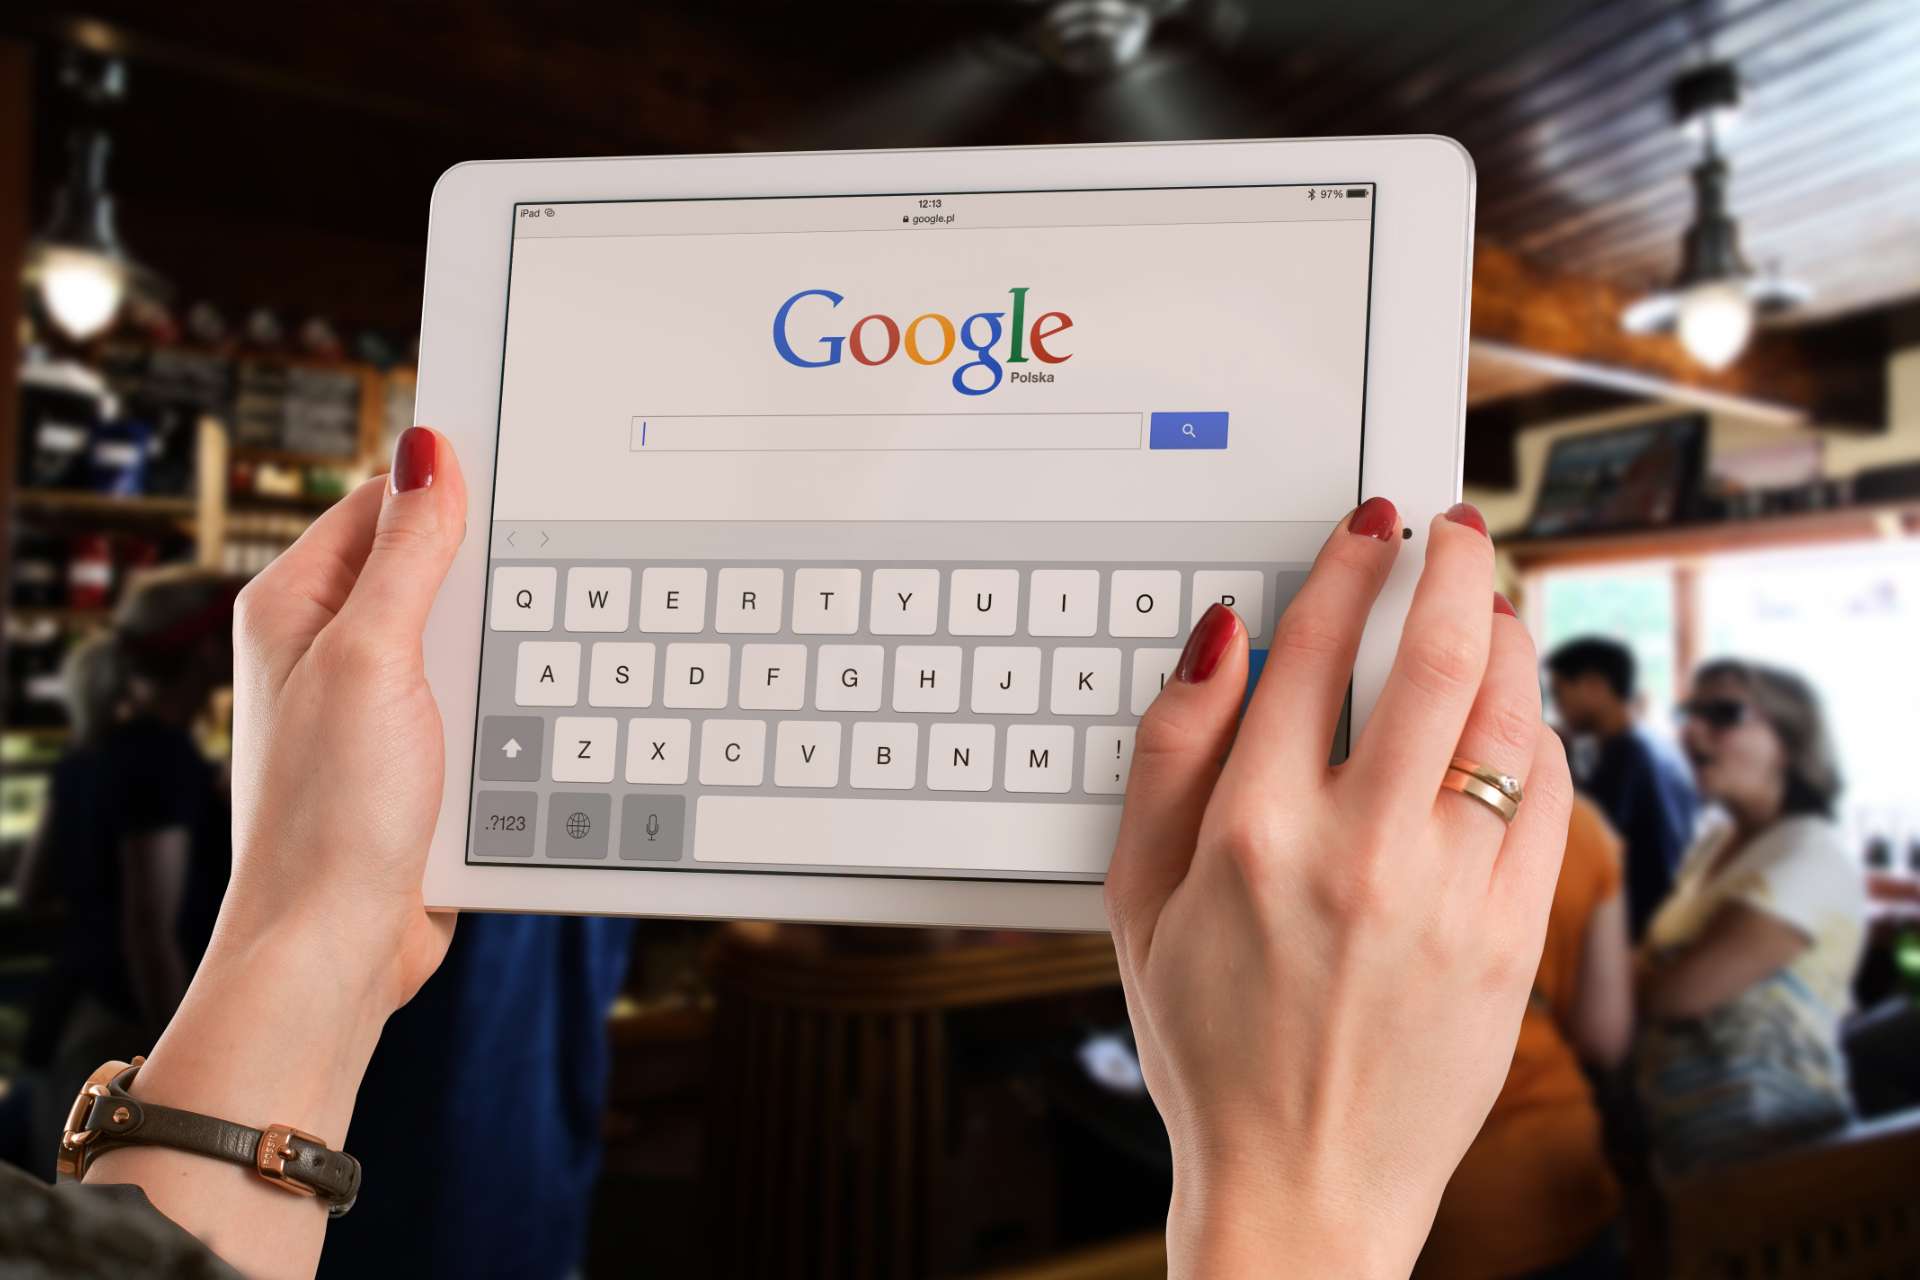 Google is the most powerful search engine on the Internet